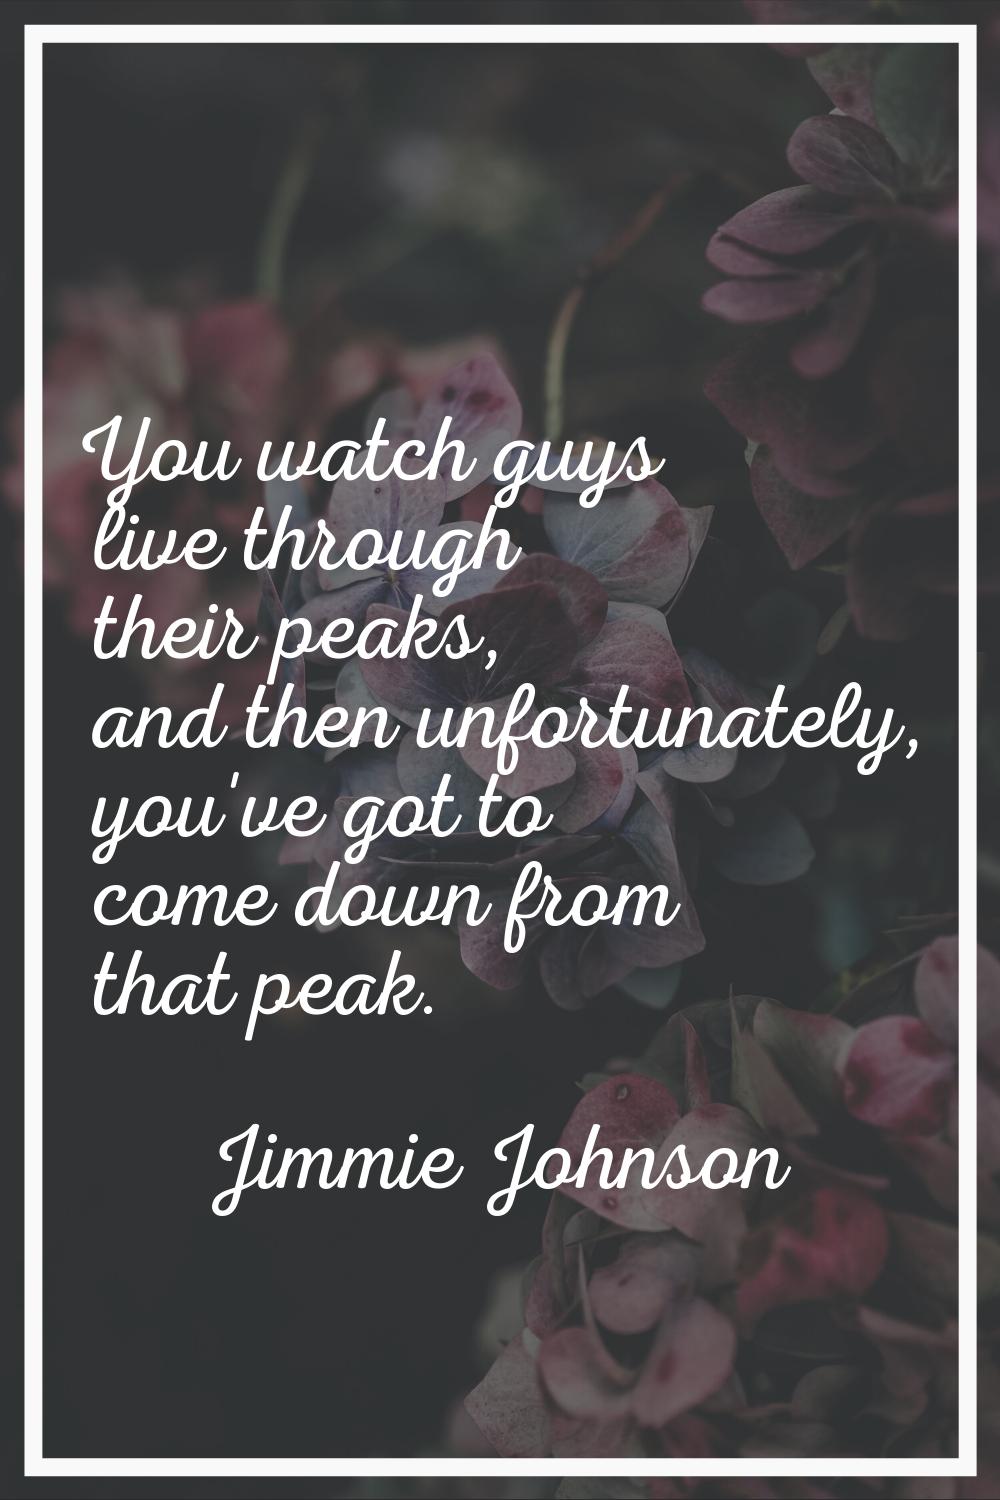 You watch guys live through their peaks, and then unfortunately, you've got to come down from that 